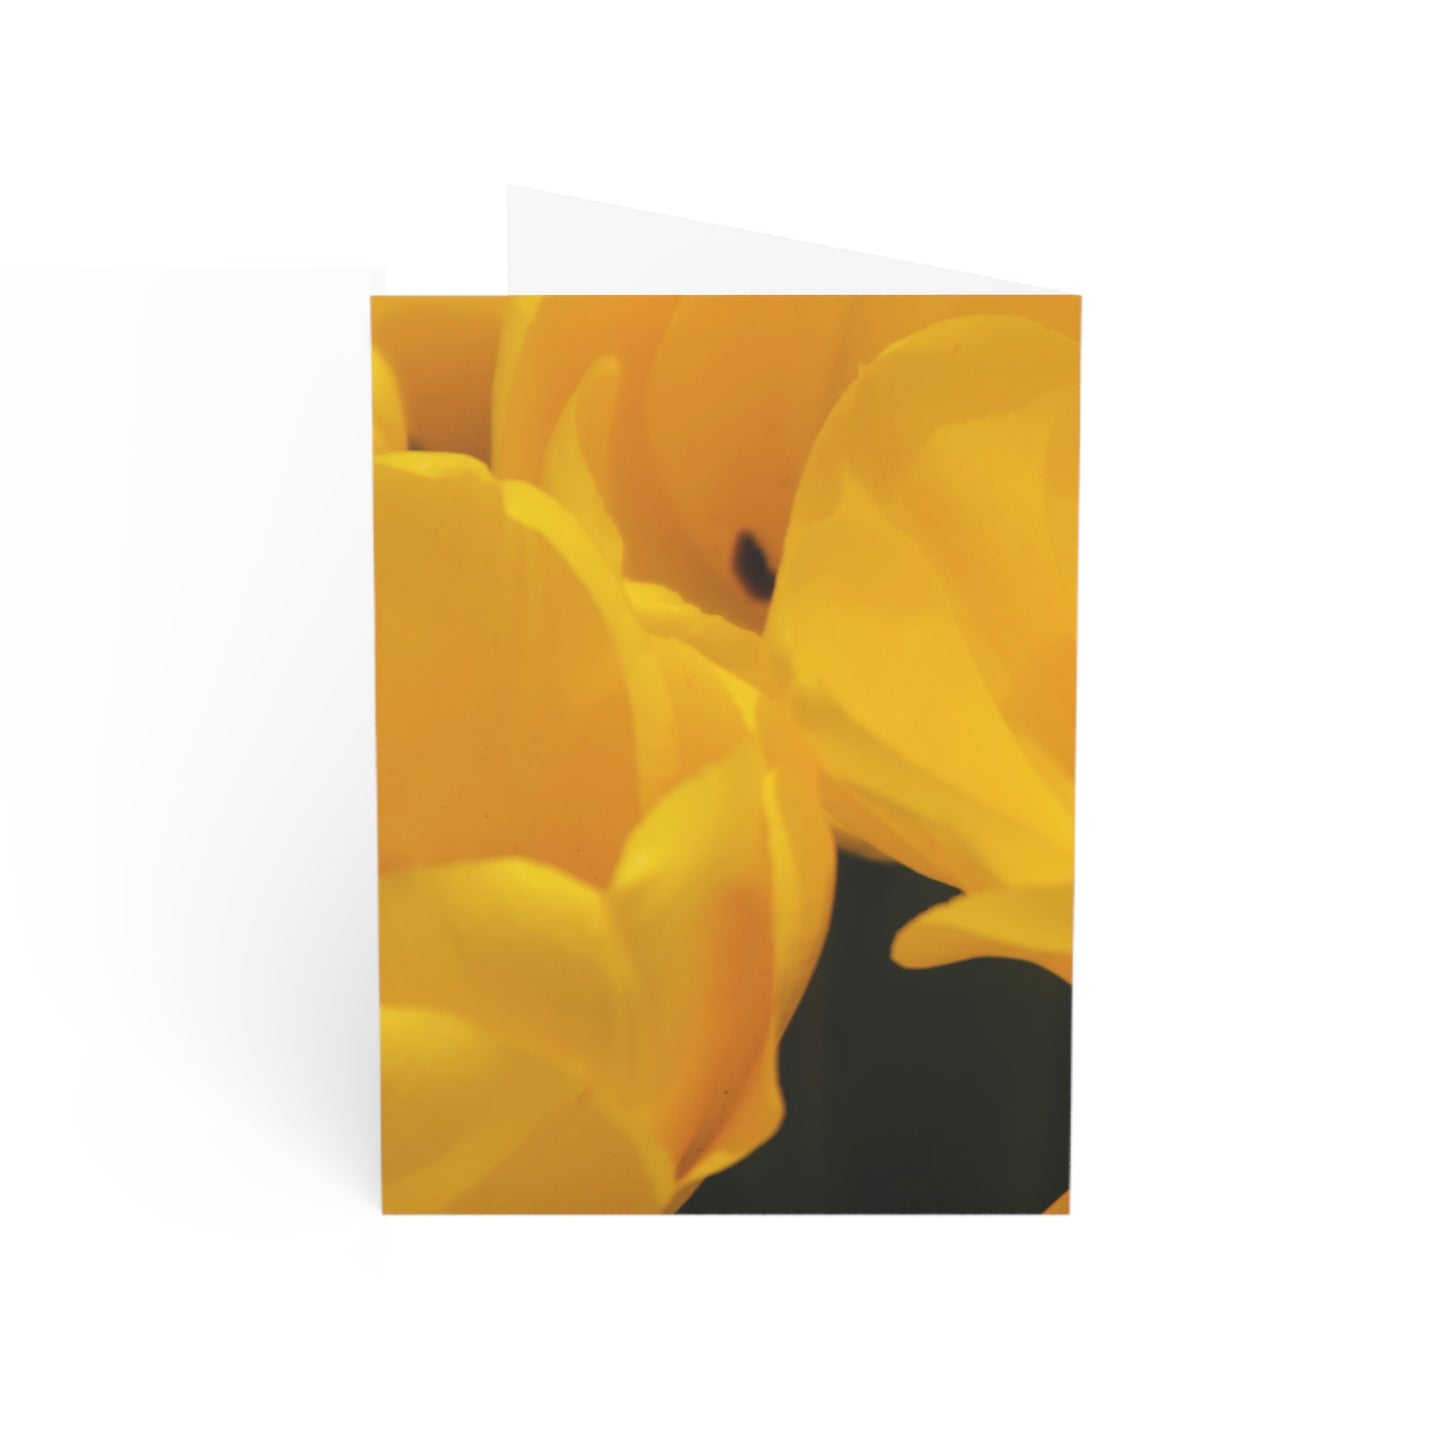 Flowers 14 Greeting Cards (1, 10, 30, and 50pcs)